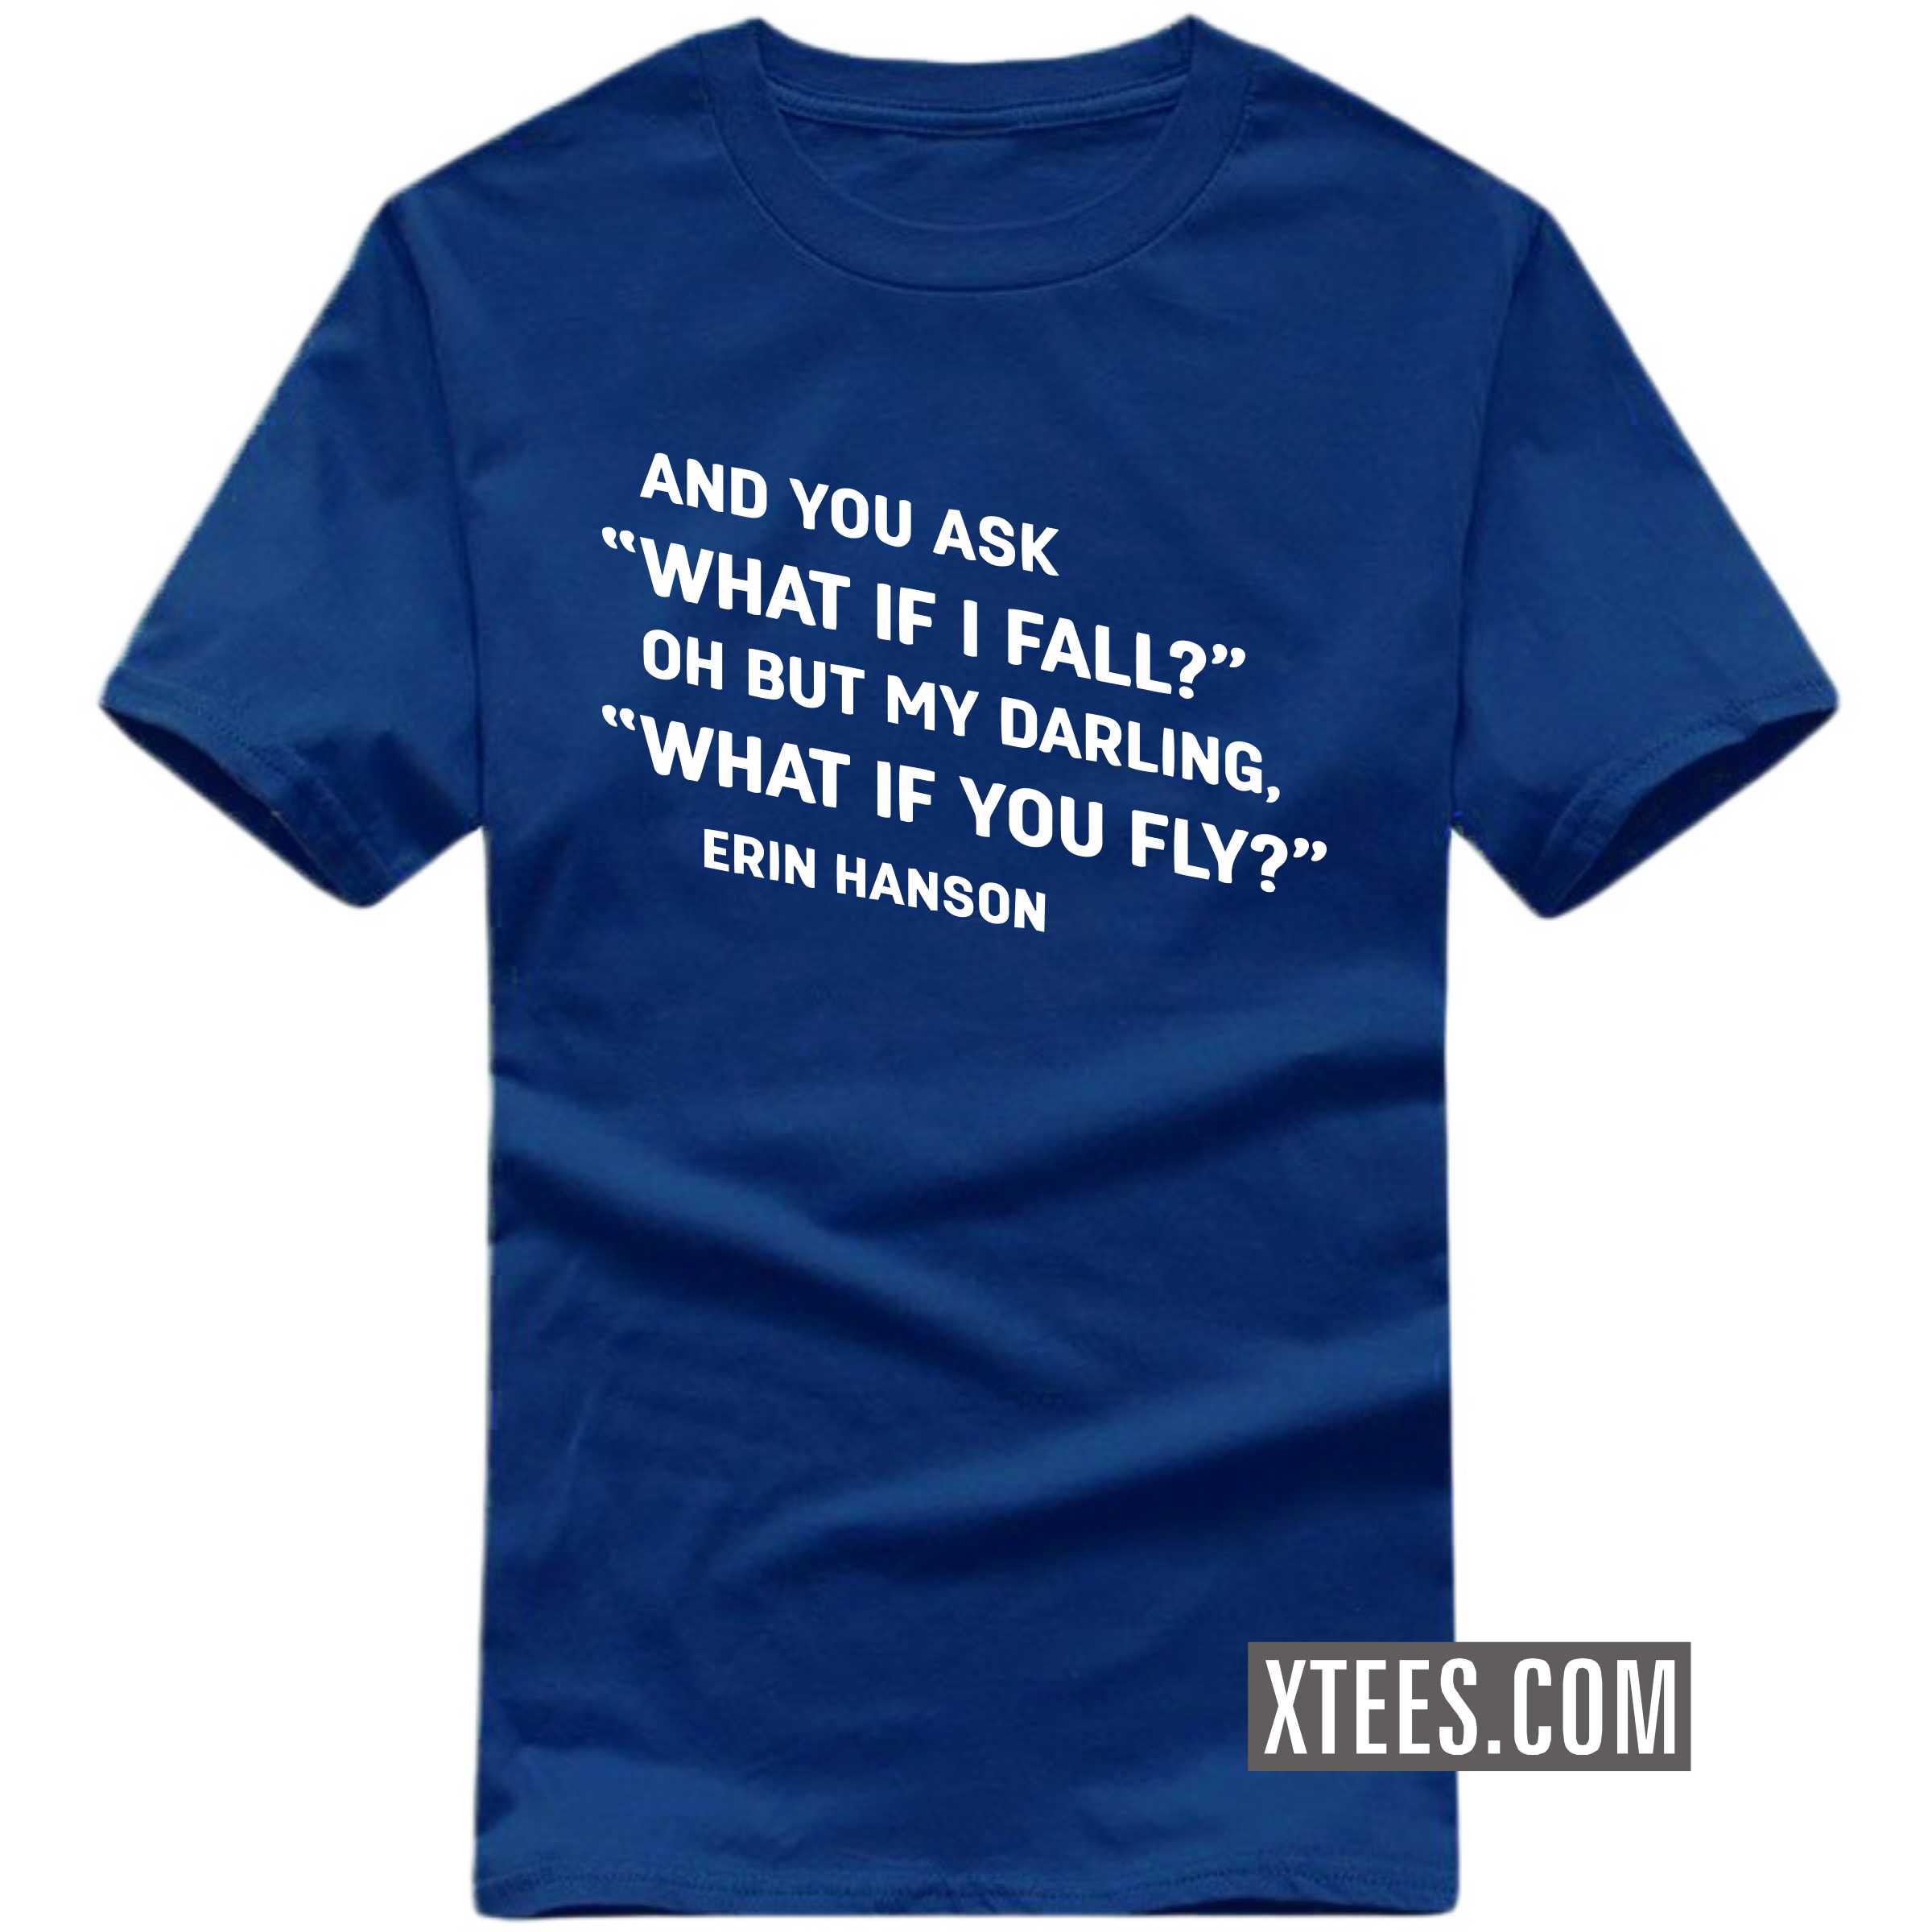 And You Ask What If I Fall? Oh But If My Darling, What If You Fly? Motivational Quotes T-shirt image